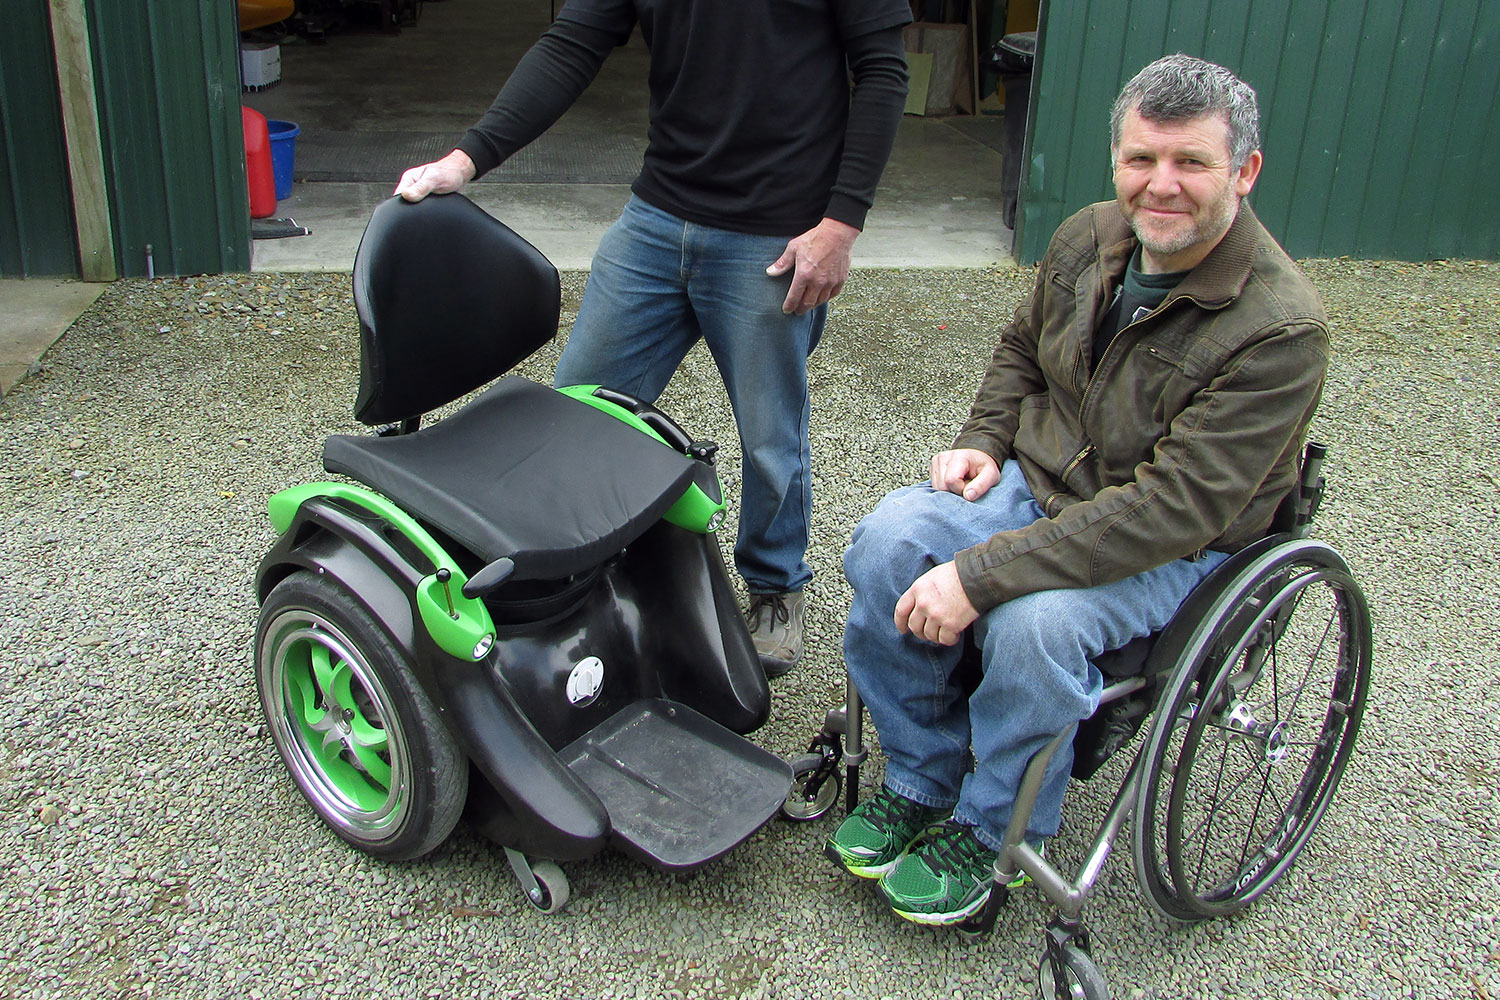 awesome tech you cant buy yet conductive legos ogo  hands free gyroscopically balanced wheelchair